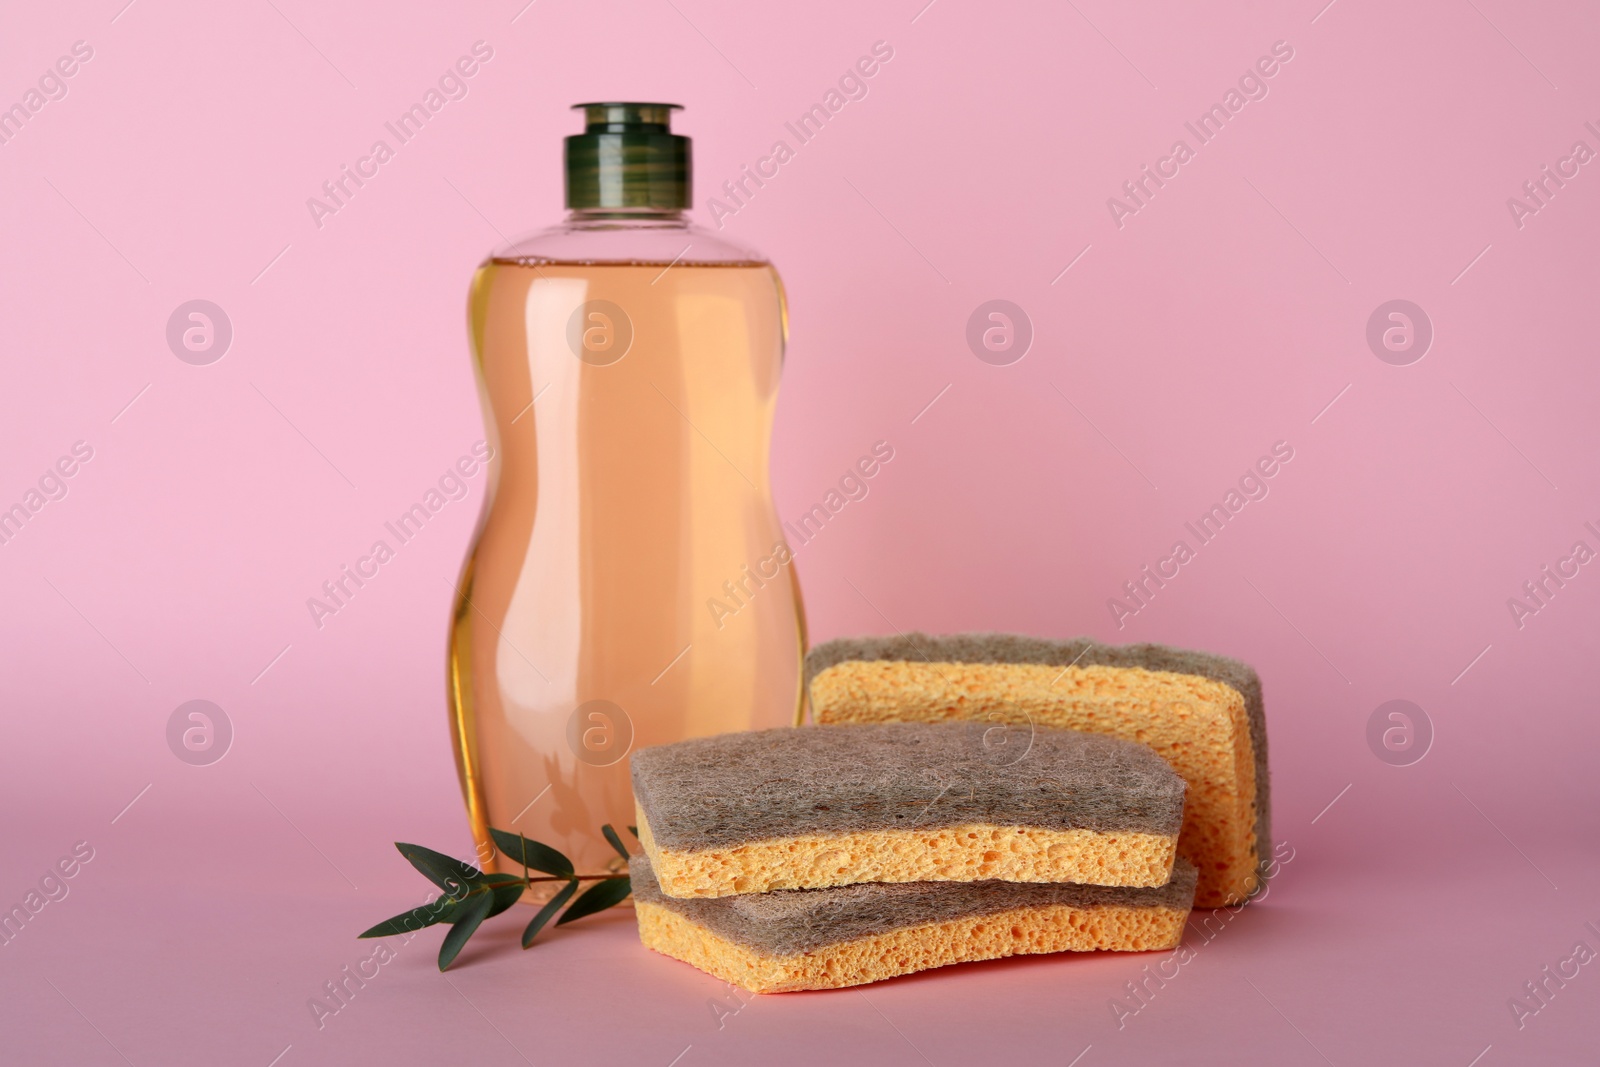 Photo of Cleaning detergent and sponges on pink background